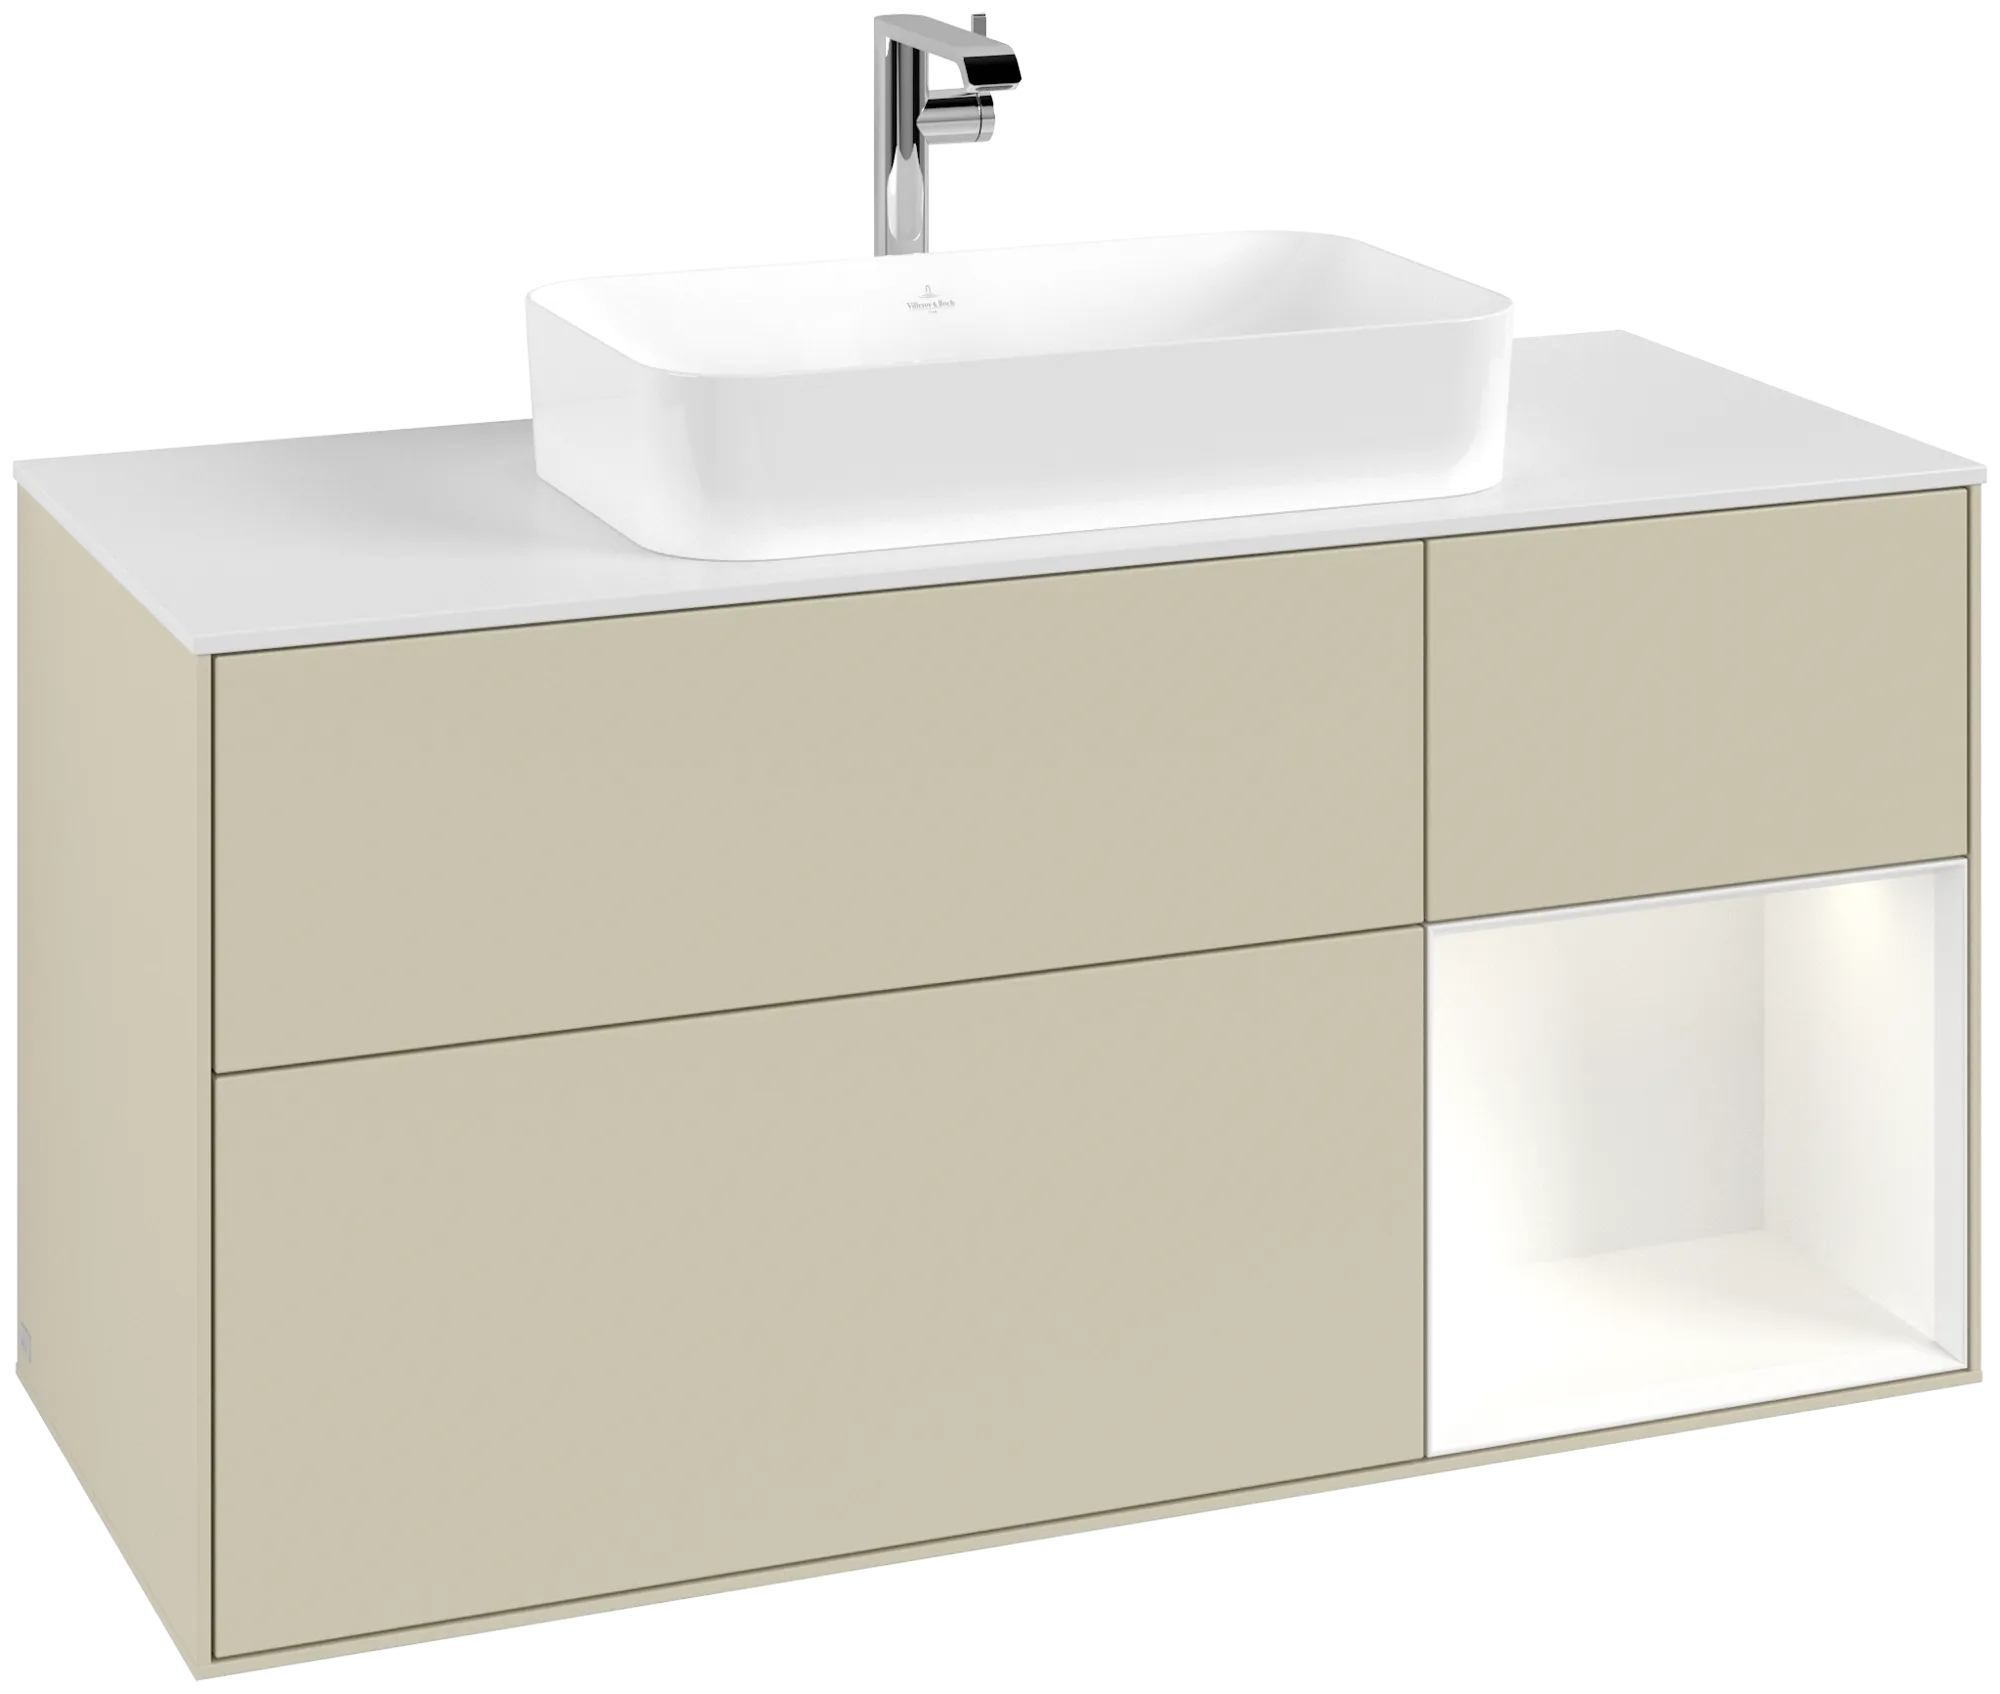 VILLEROY BOCH Finion Vanity unit, with lighting, 3 pull-out compartments, 1200 x 603 x 501 mm, Silk Grey Matt Lacquer / White Matt Lacquer / Glass White Matt #G301MTHJ resmi